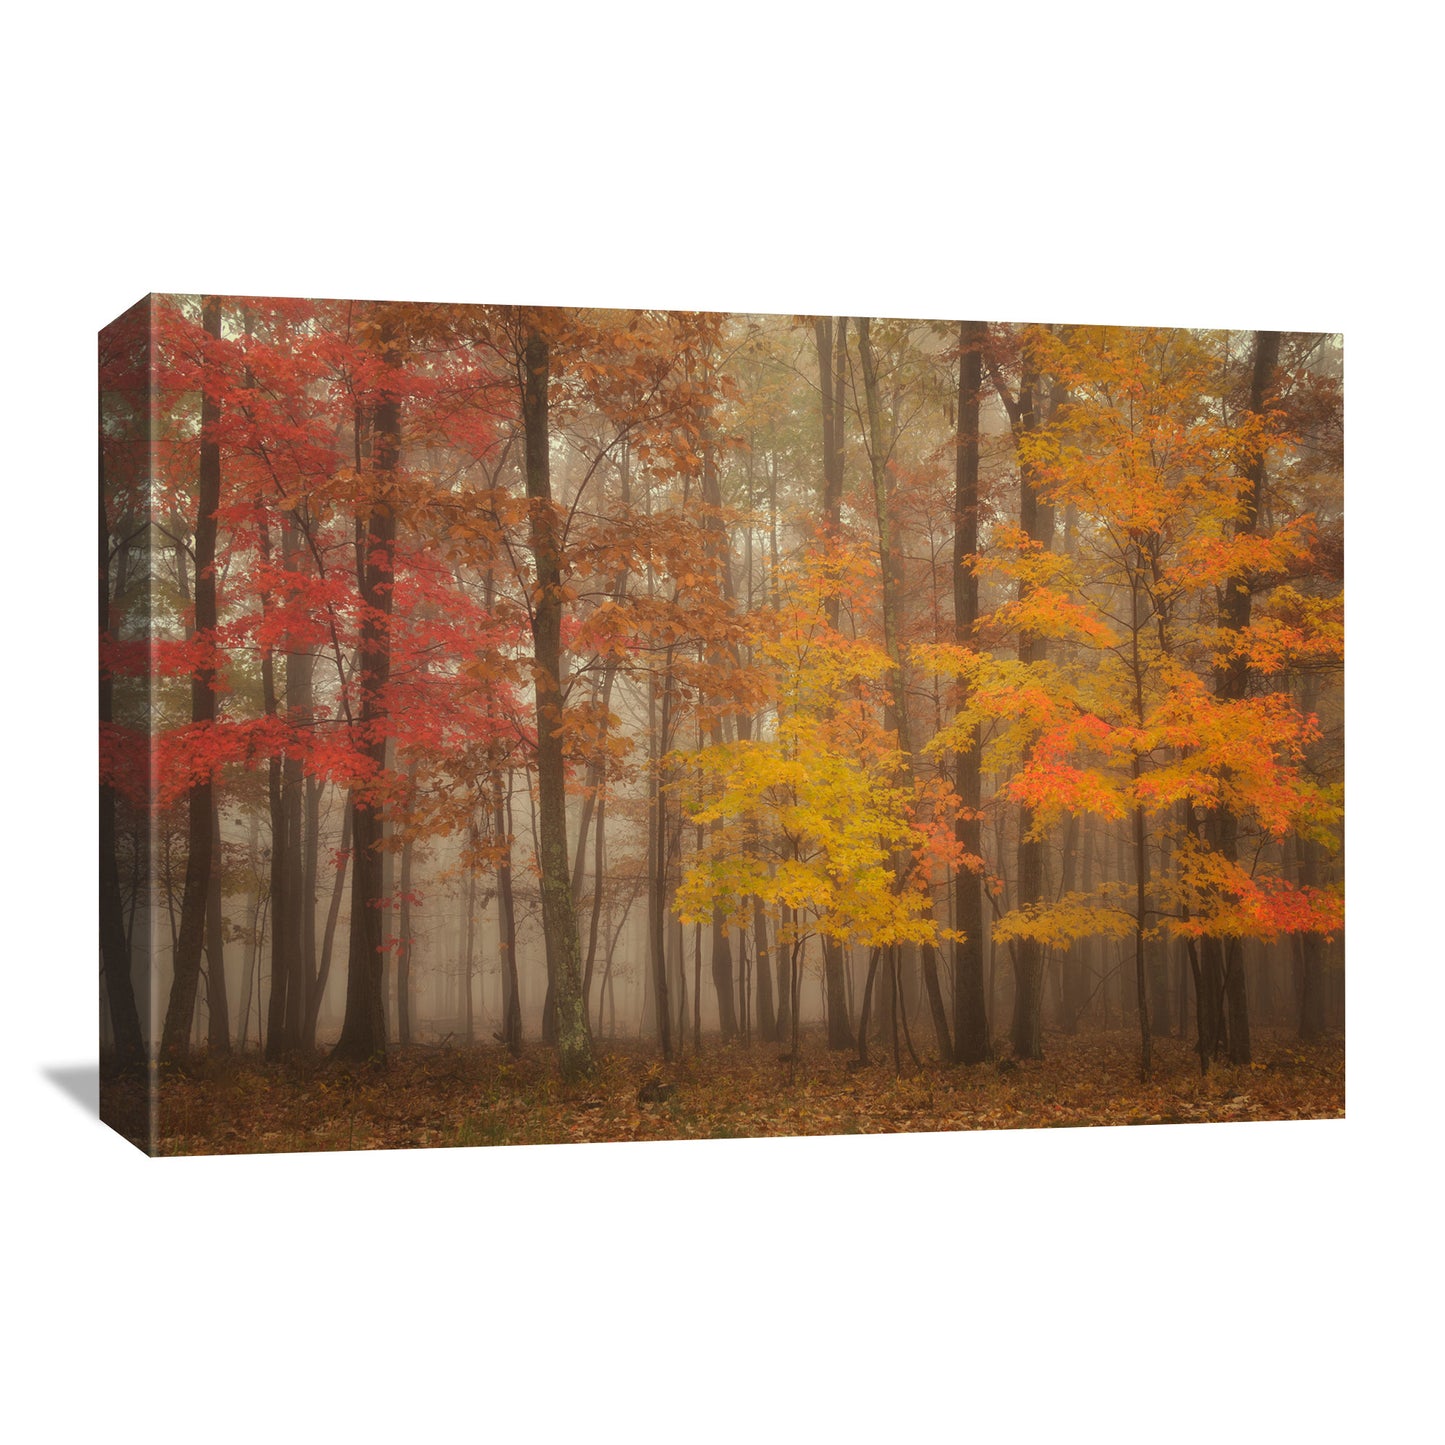 A fall canvas wall art piece showcasing a variety of trees in a misty forest setting, highlighting the natural colors of the fall season.